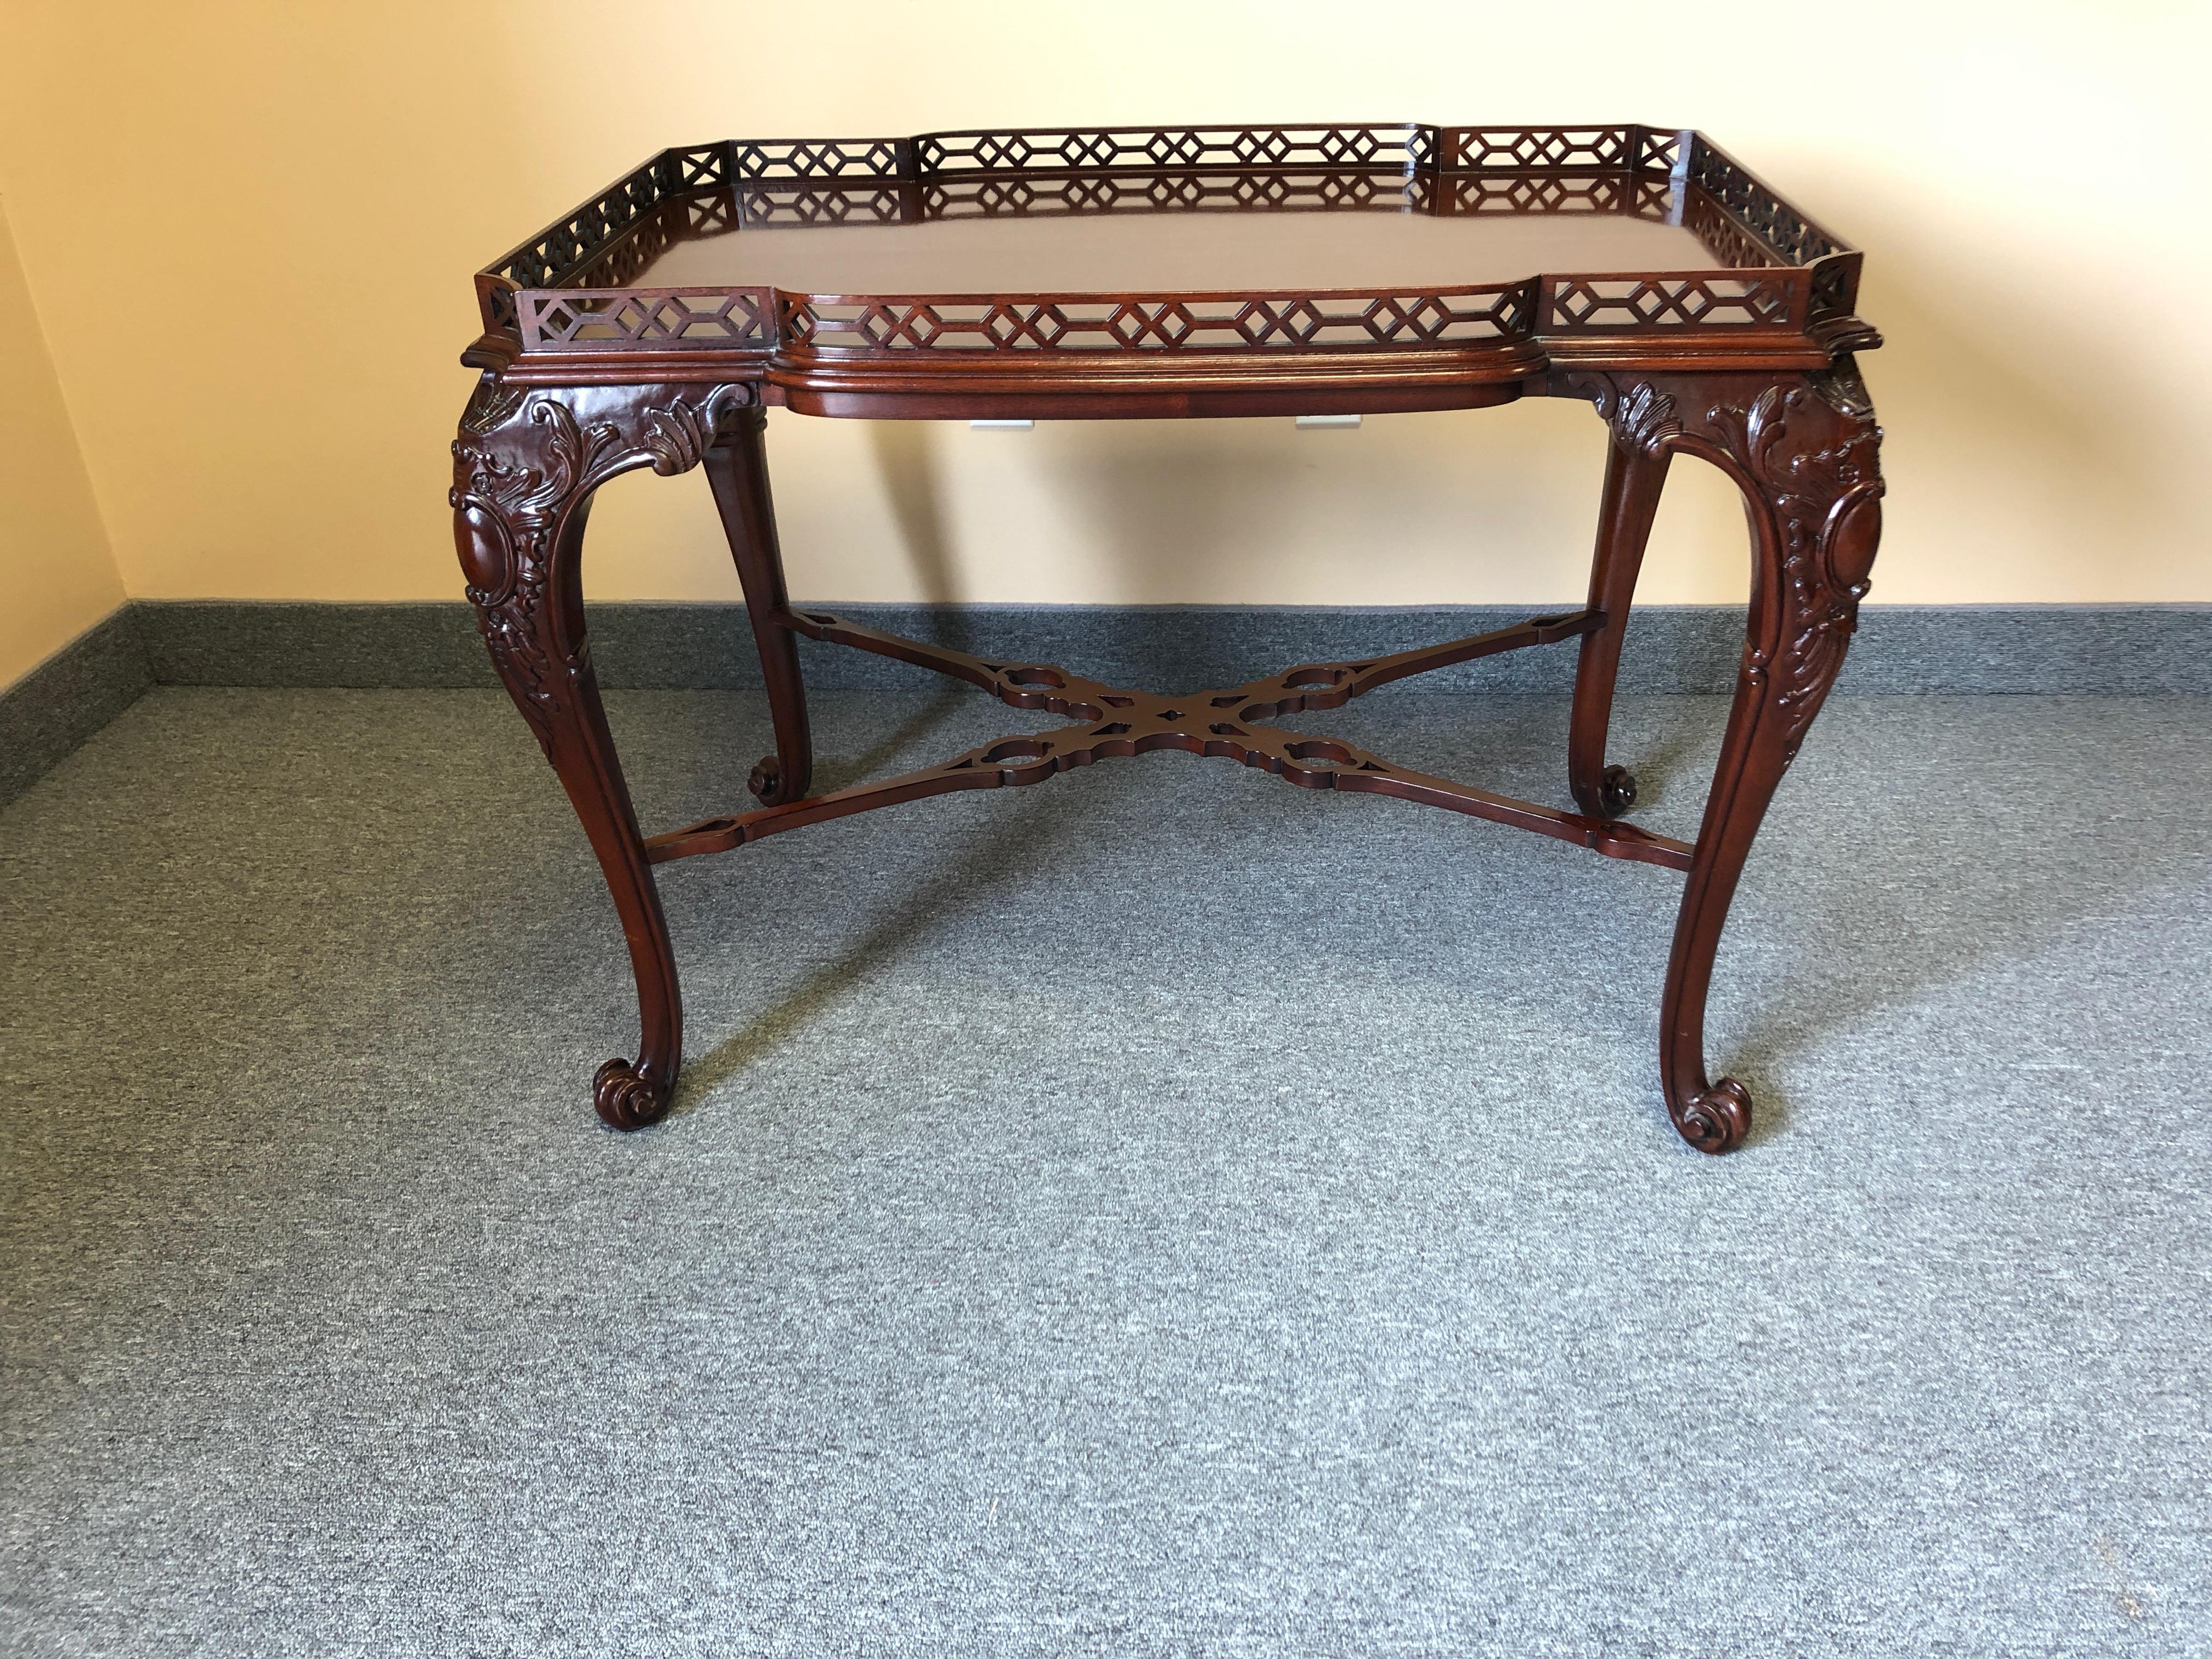 Very refined rectangular tea table or high coffee table having intricate fretwork, gorgeous shell motif carvings on the cabriole legs and paw feet. Fretwork is 1.5 inches high.